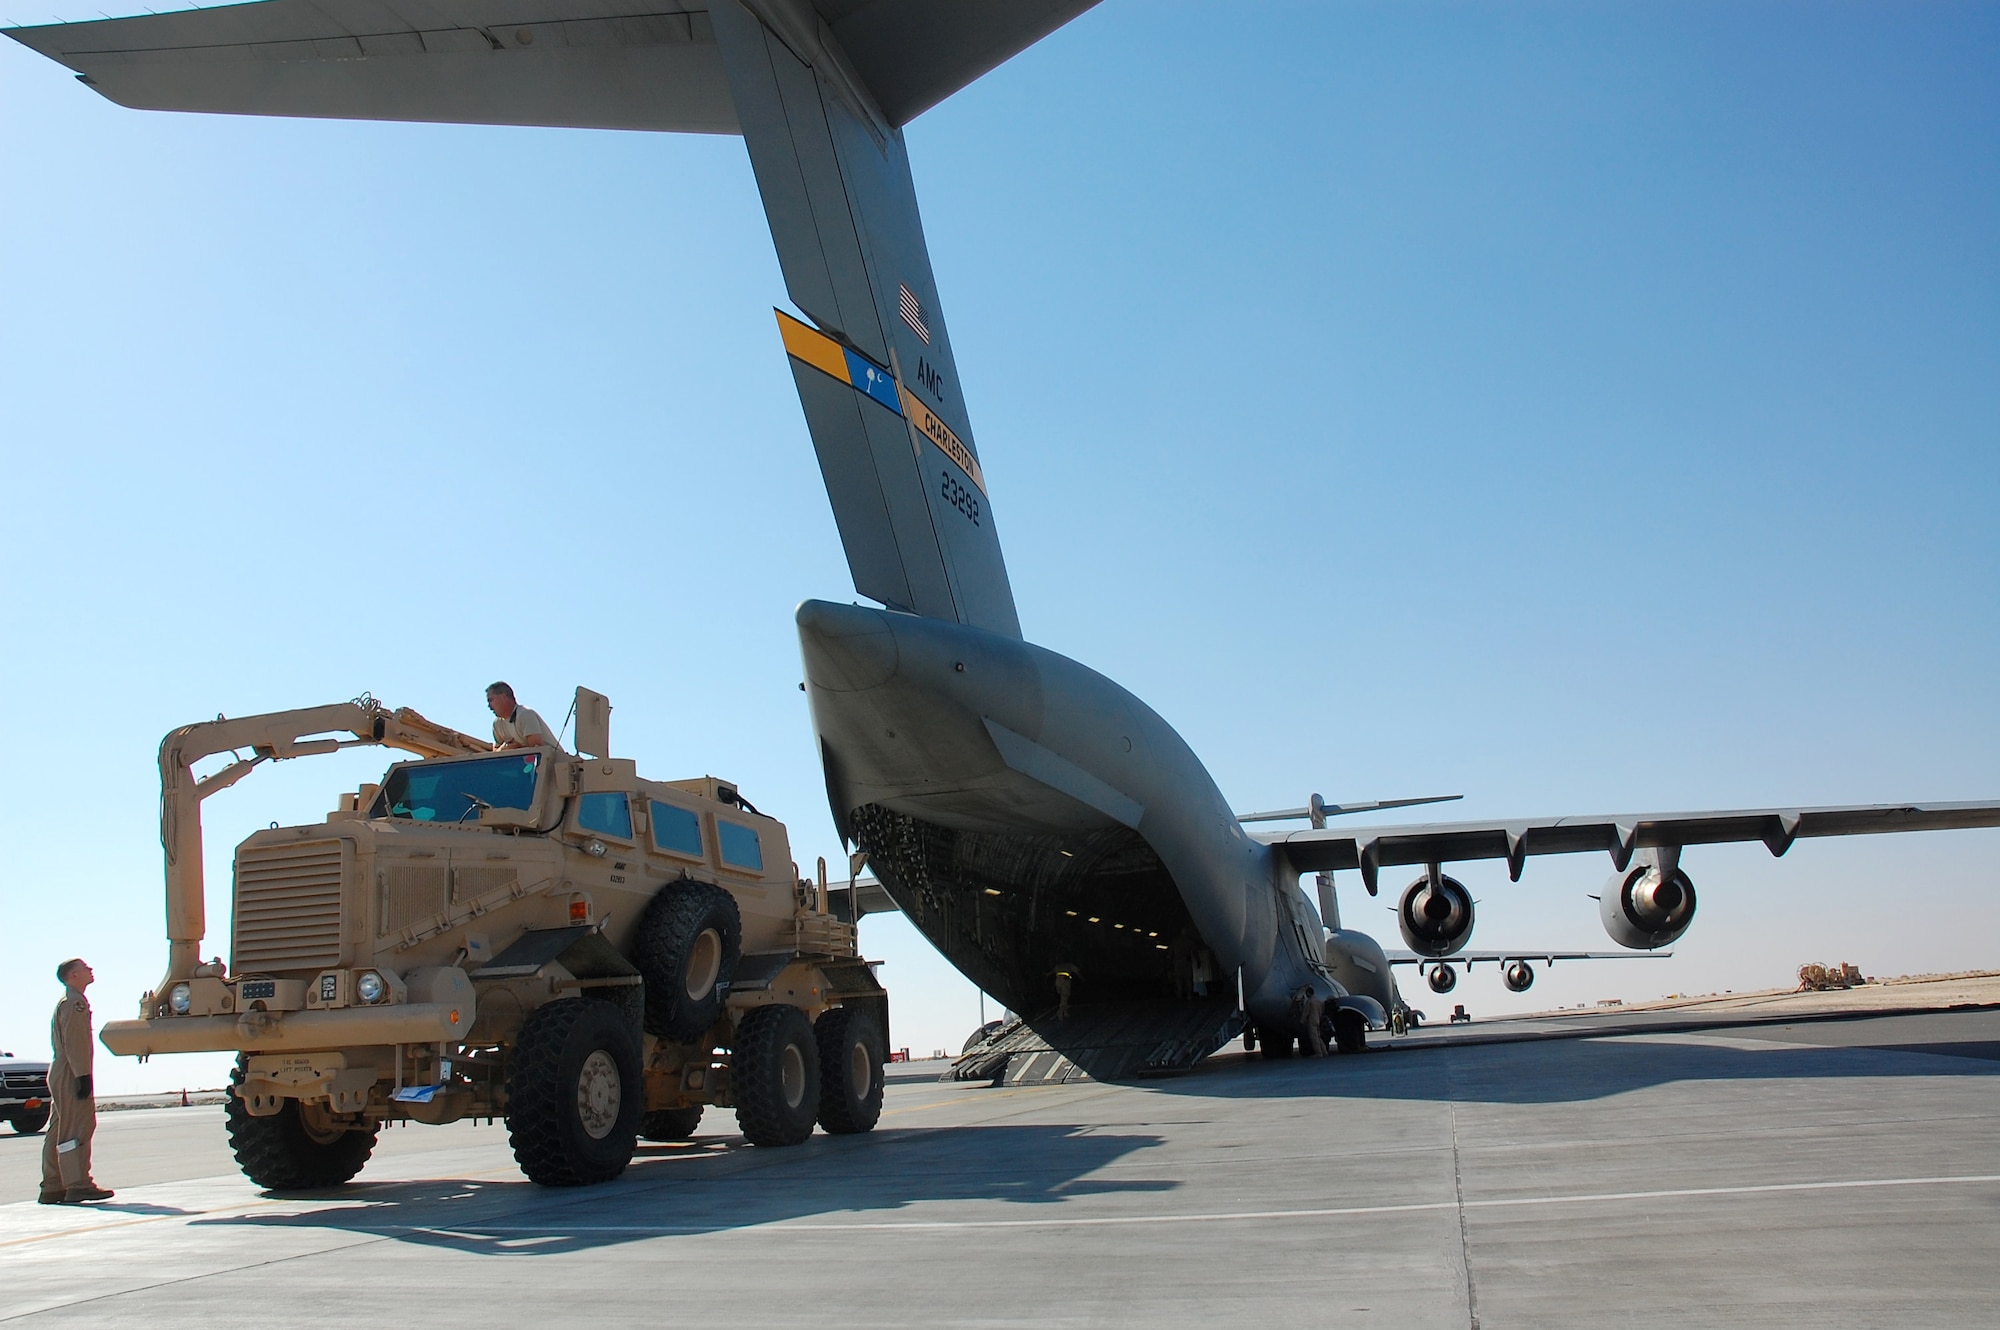 SOUTHWEST ASIA -- Airmen from the 386th and 379th Air Expeditionary Wings load a Mine Resistant Ambush Protected vehicle onto a C-17 Globemaster III from Charleston AFB, S.C., Dec. 28.  The MRAP was heading to Iraq and is designed to help protect military members from mines and improvised explosive devices.  The C-17's aircrew members are from McGuire AFB, N.J. and currently deployed to an air base in the Middle East.  (U.S. Air Force photo/Staff Sgt. Tia Schroeder)